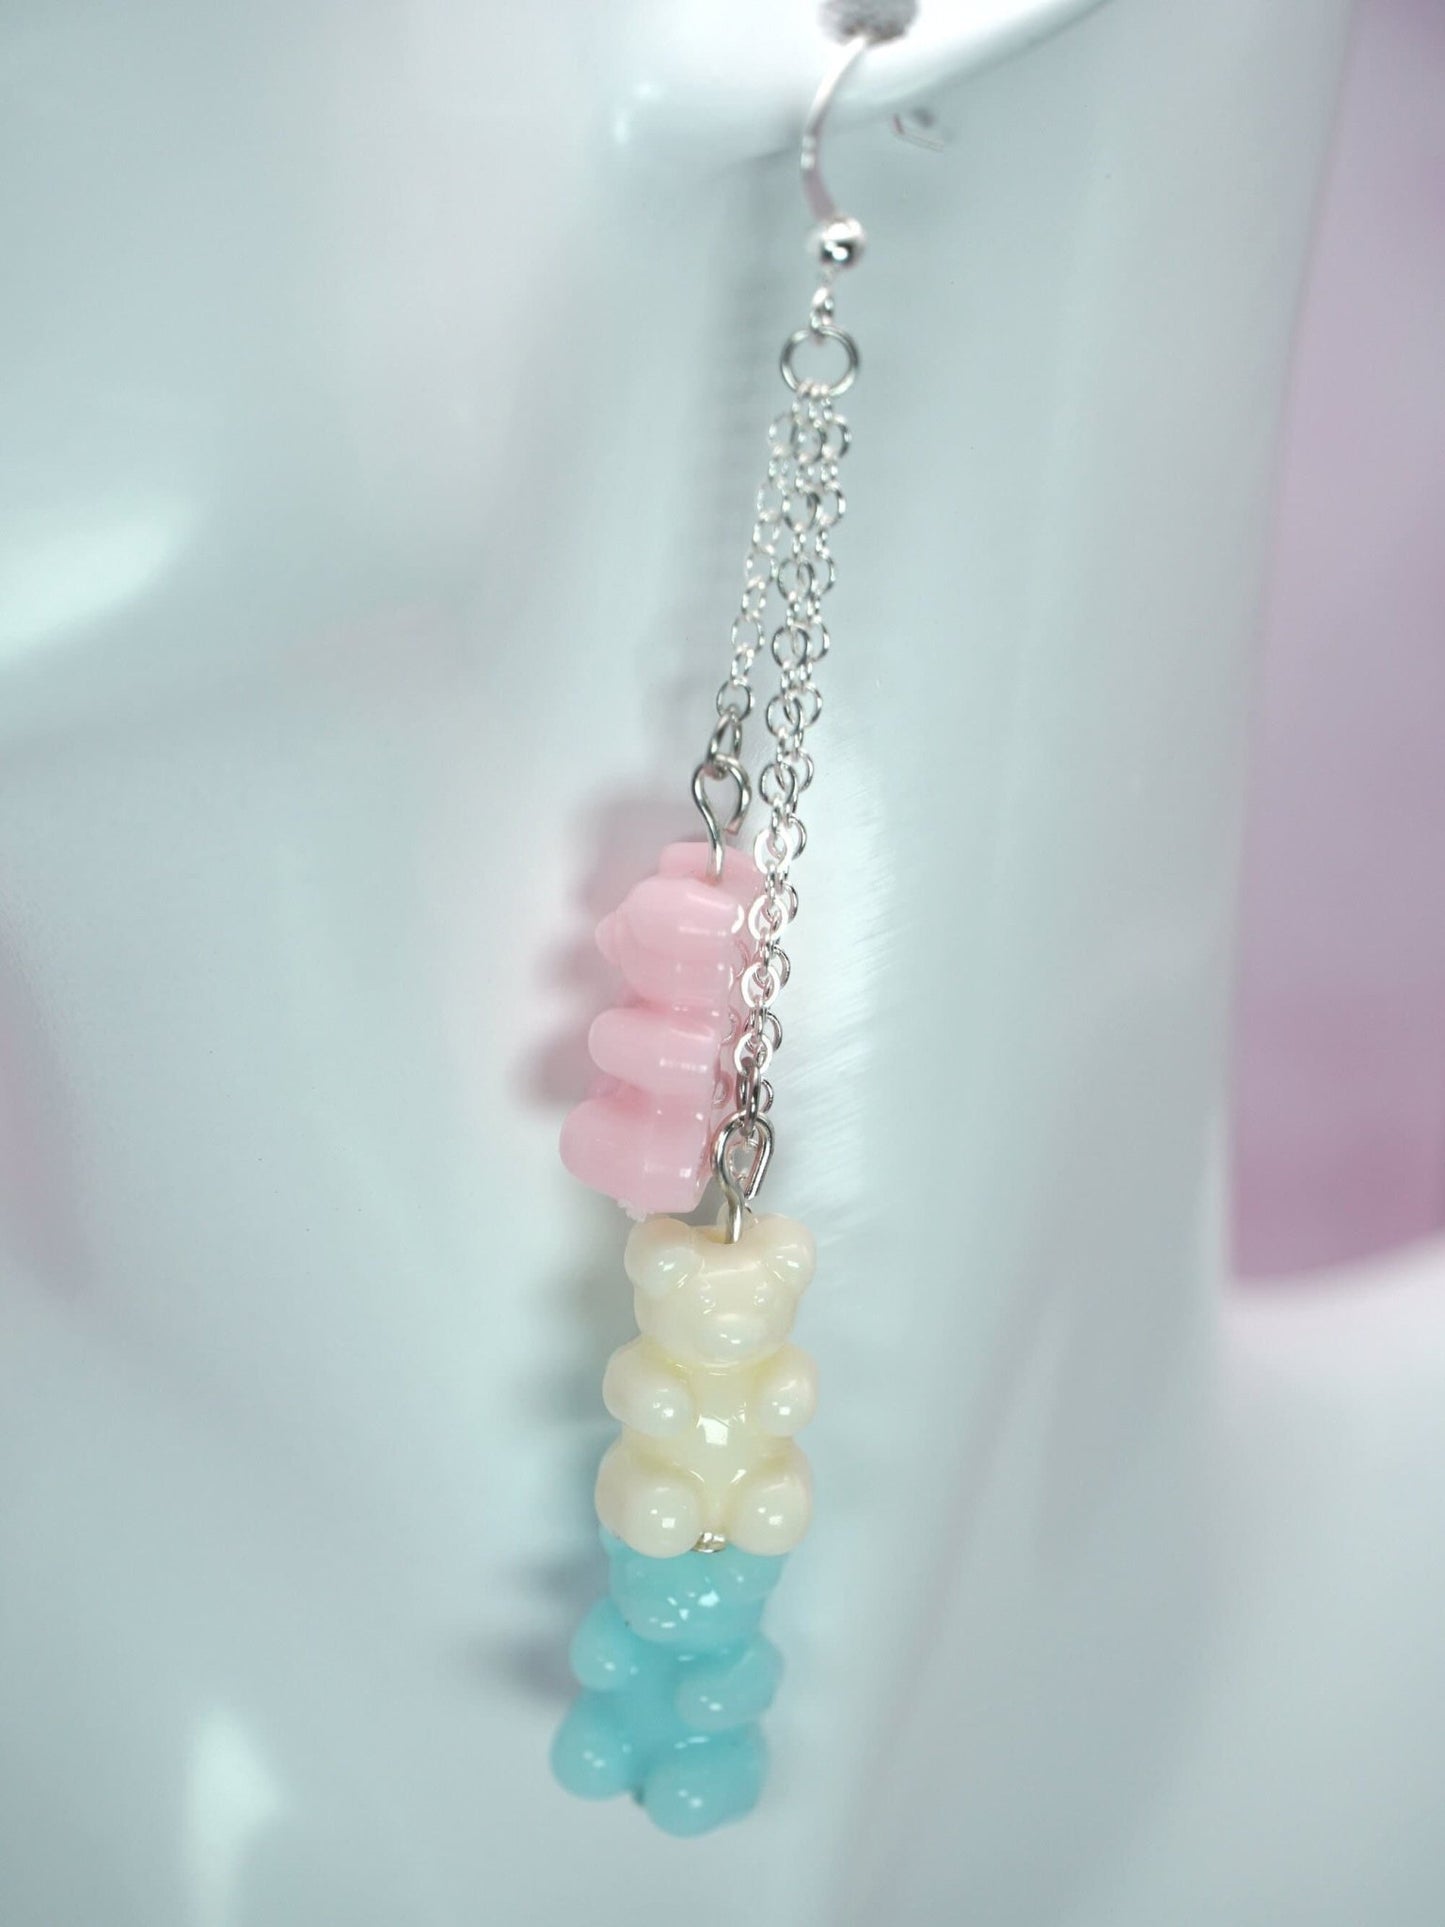 Trans Pride Gummy Bear Earrings, Pink, White and Baby Blue Gummy Bears suspended on silver chains. Perfect for Pride Month 2024. - Dekowaii Jewelry Company